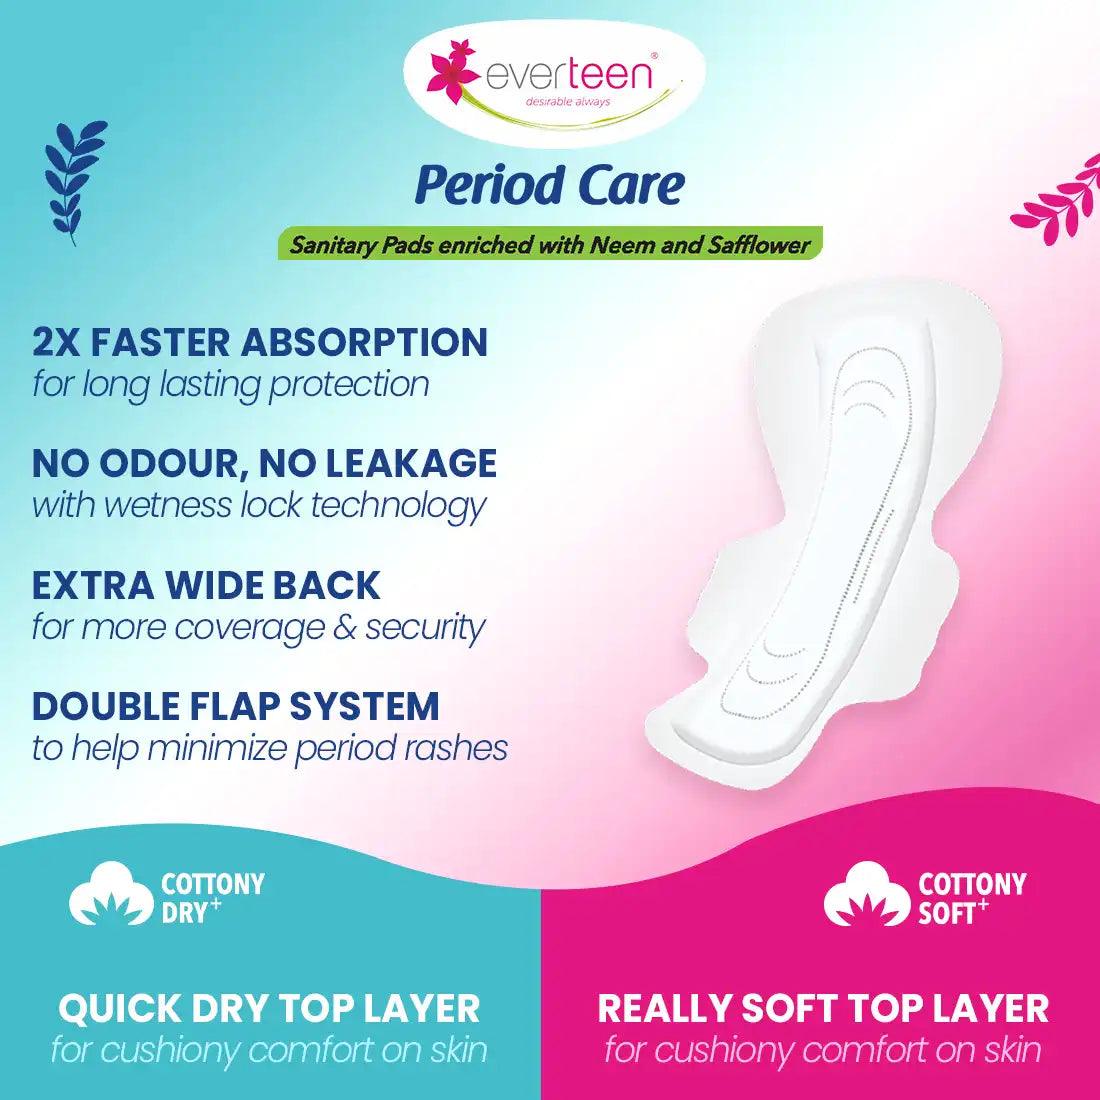 everteen Period Care XXL Sanitary Pads Offer 2X Faster Absorption, Double Flaps and Other Benefits 